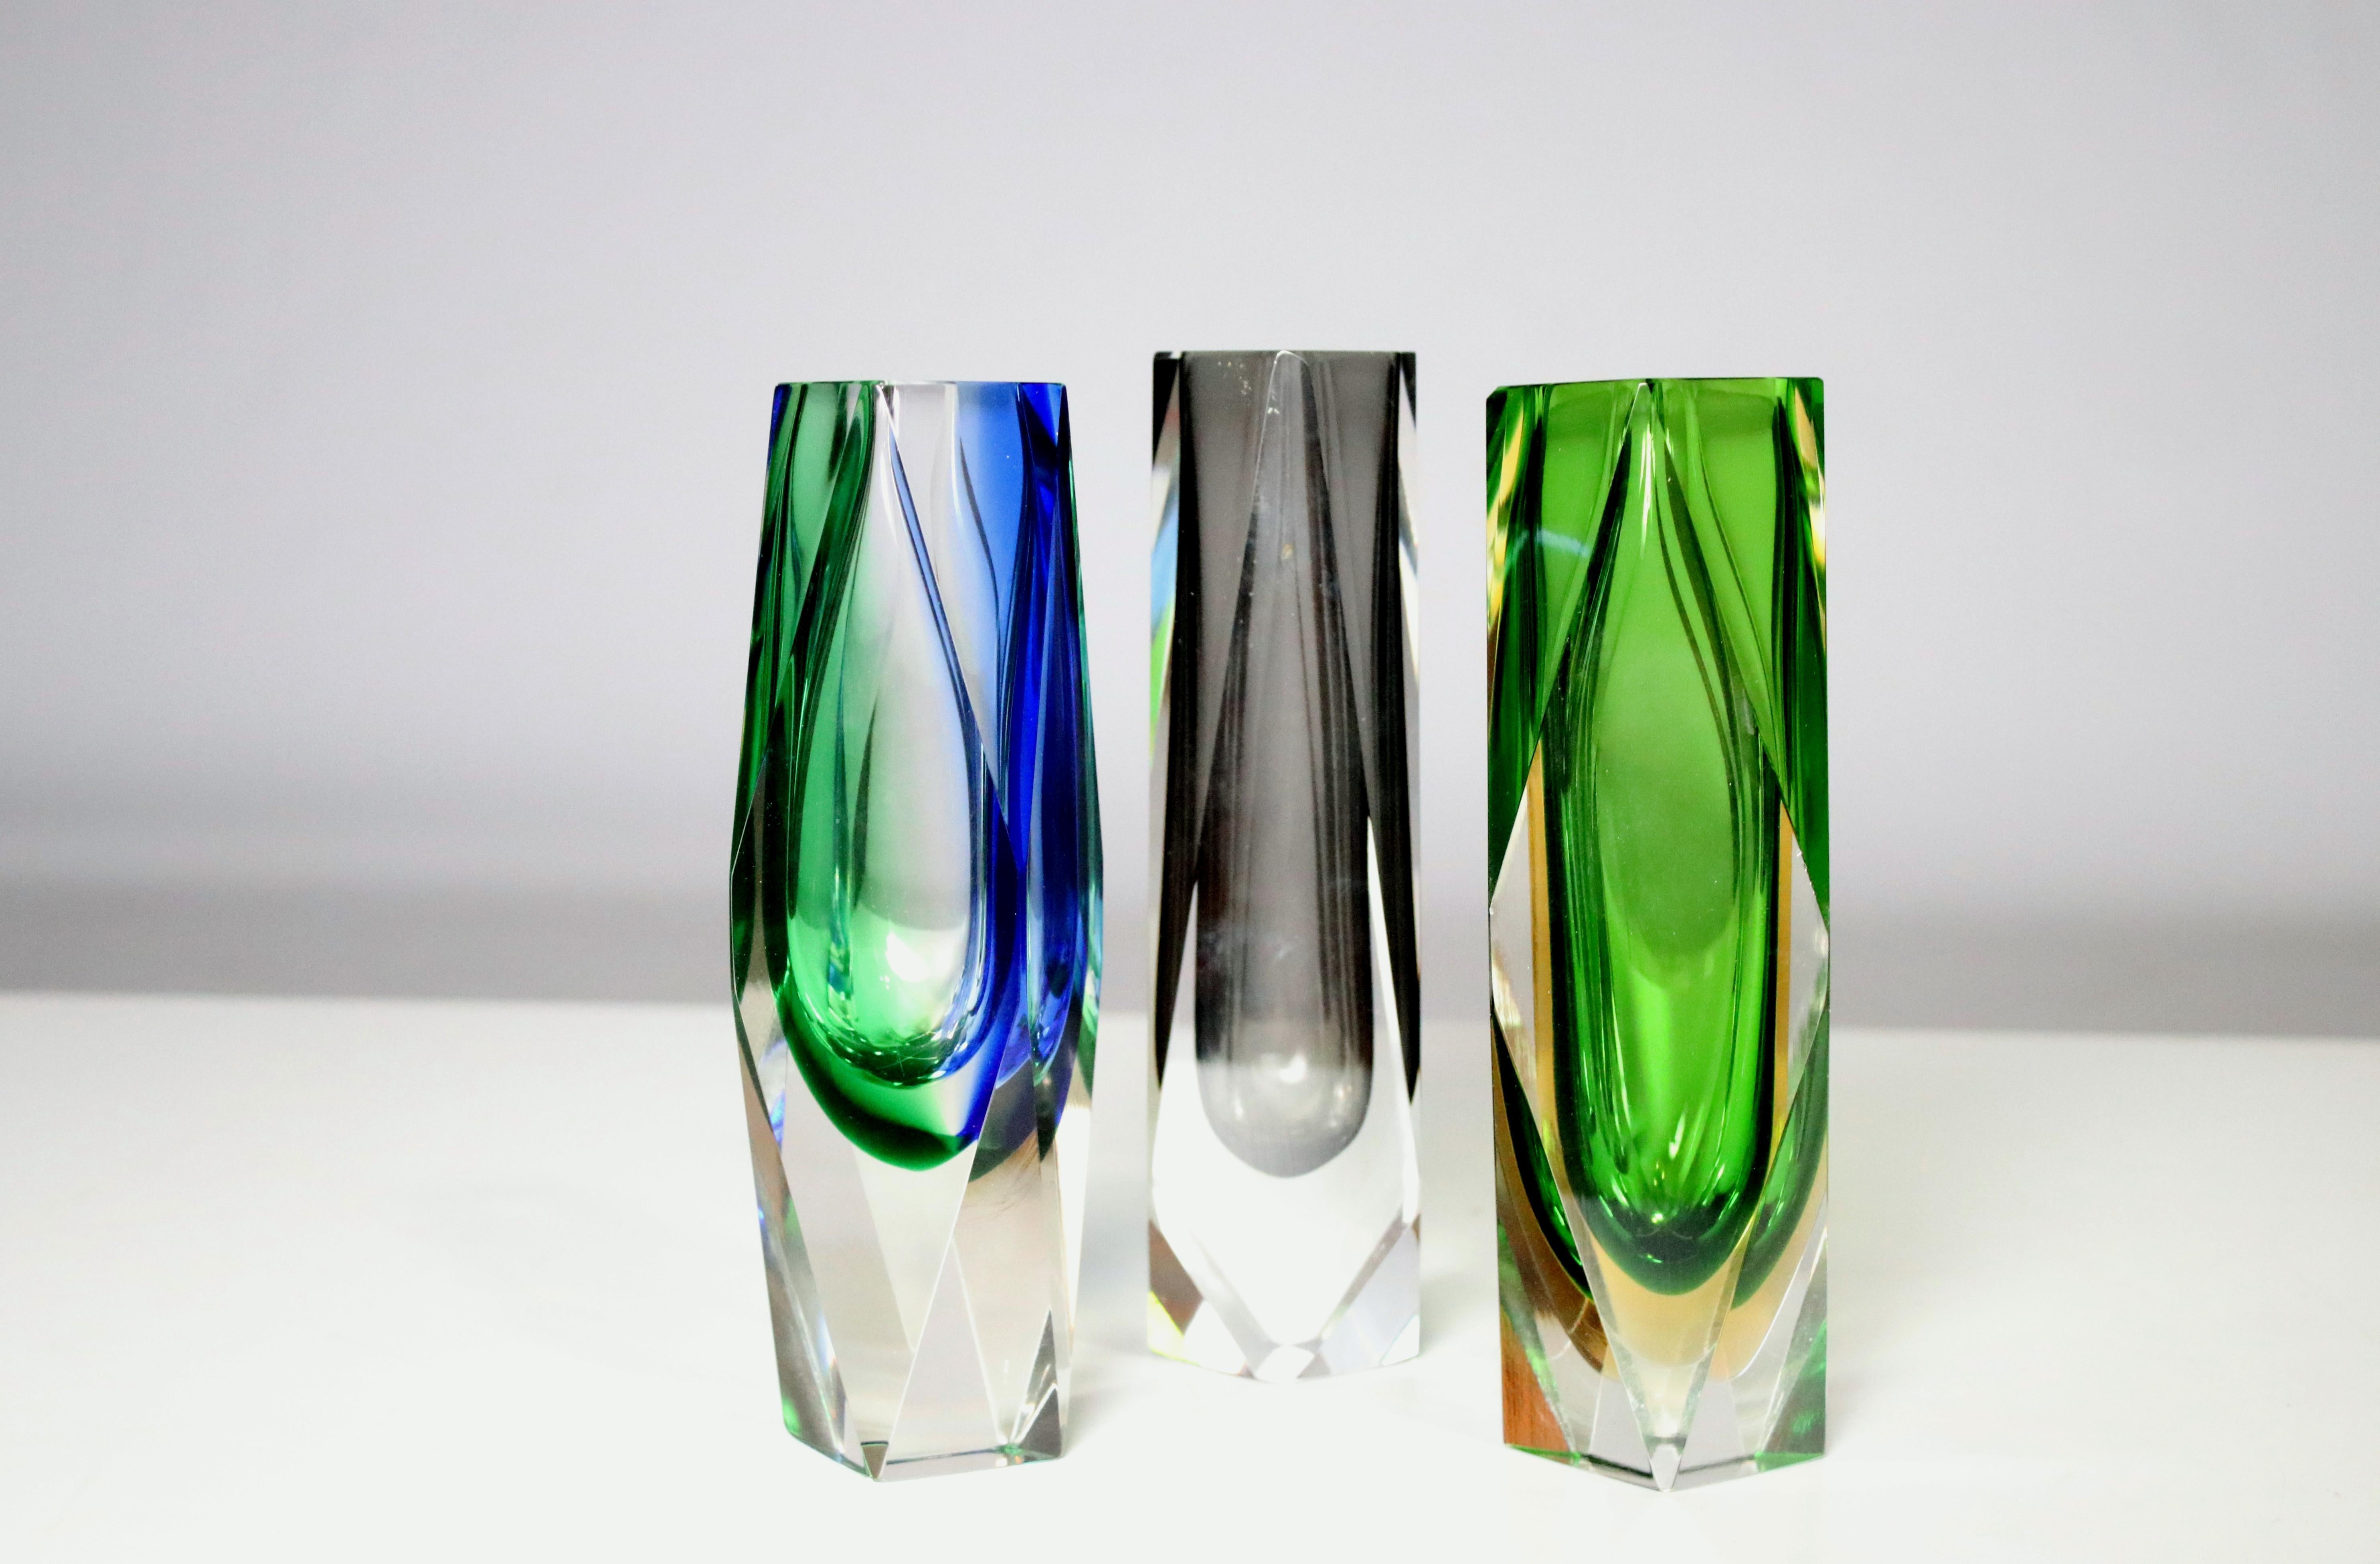 A collection of 3 Mandruzzato Murano faceted art glass vases one in smoke, one in green and one in blue/green. All the same shape and size. Excellent Vintage Condition, Original Condition Unaltered, No Imperfections.